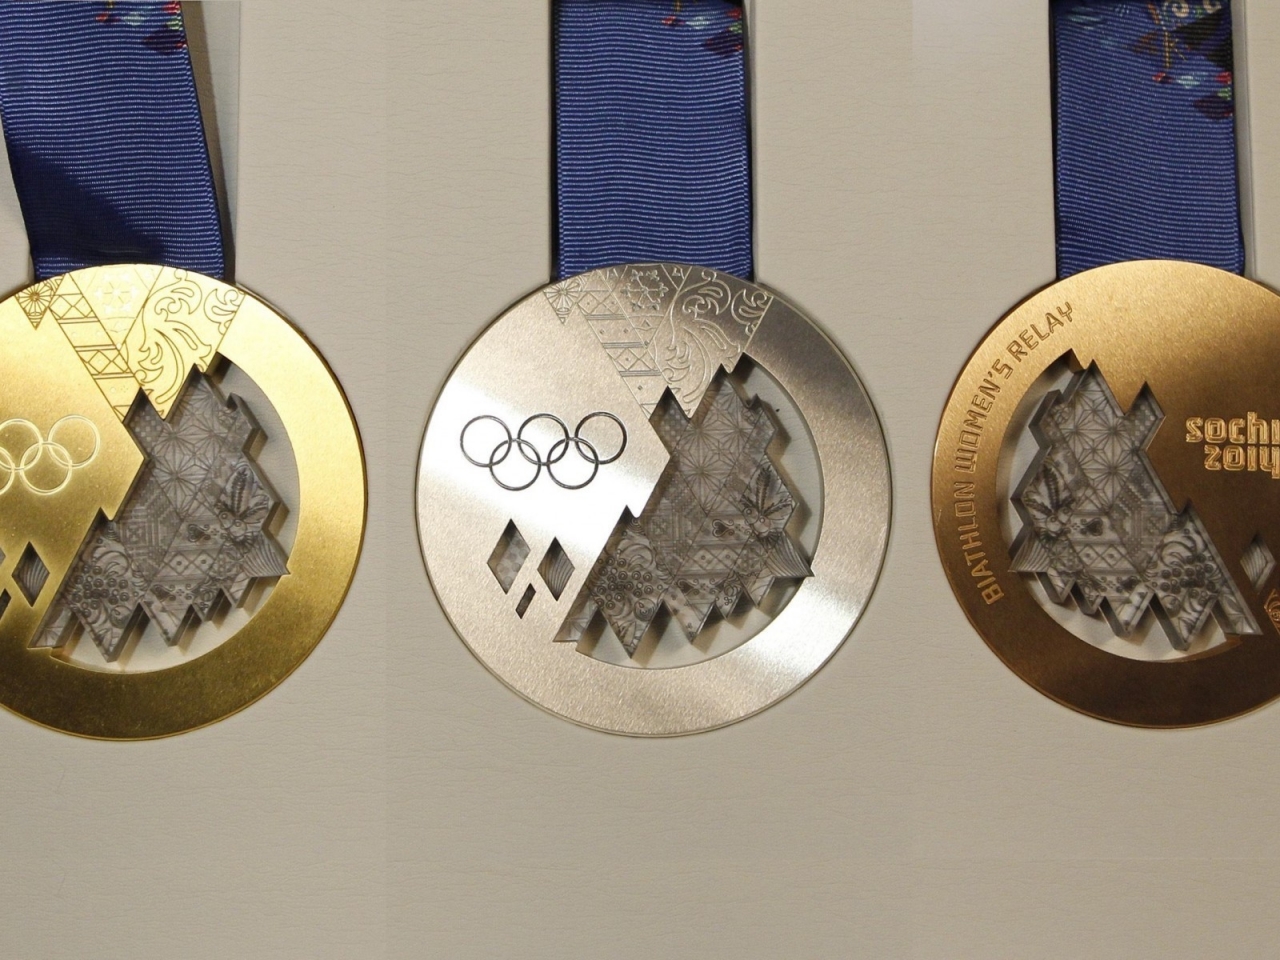 Sochi 2014 Medals for 1280 x 960 resolution